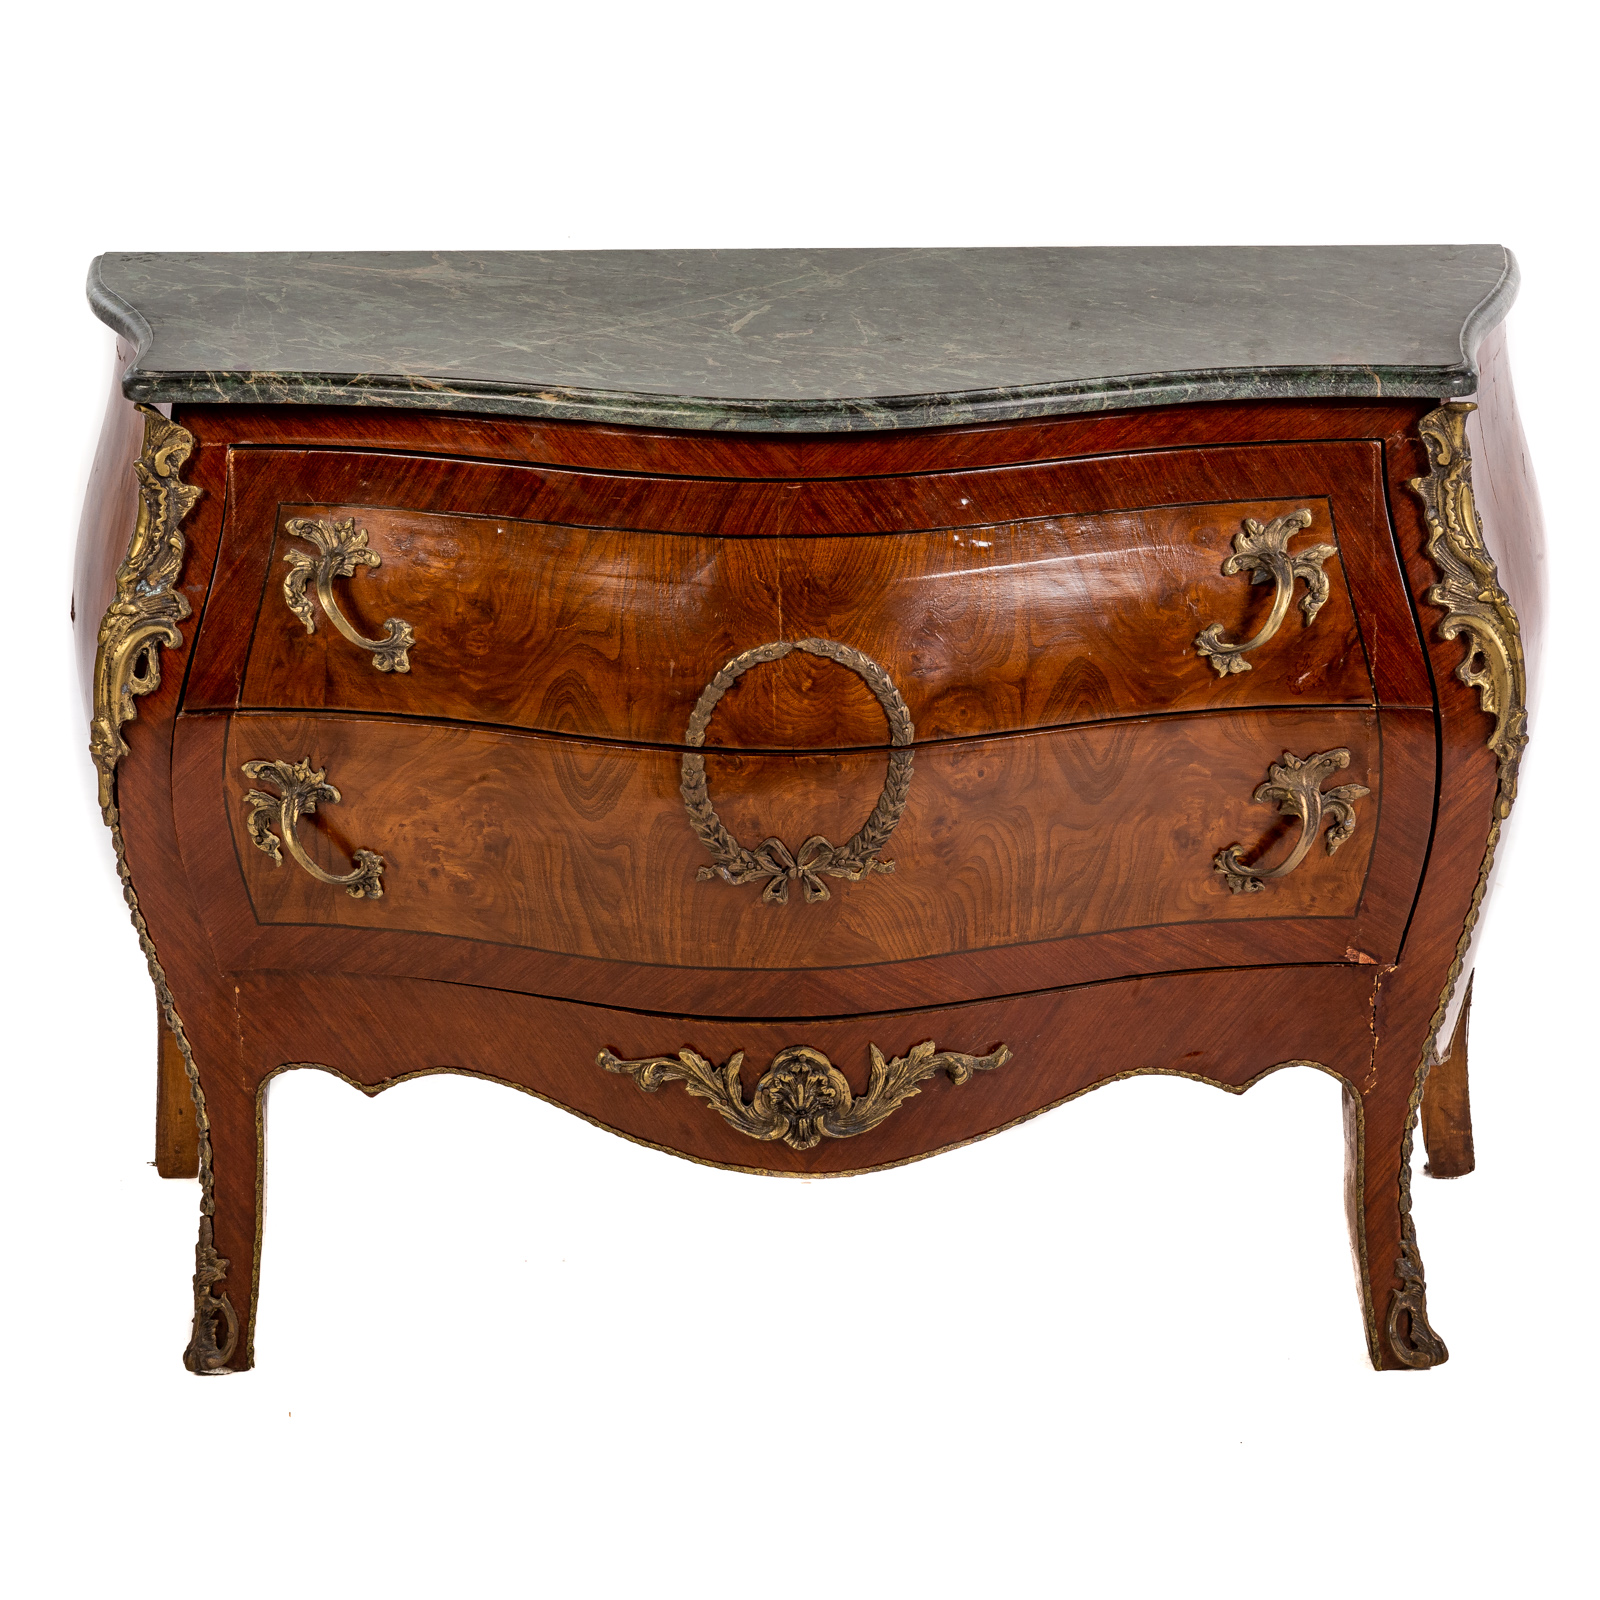 LOUIS XV STYLE MARBLE TOP BOMBE 33876f